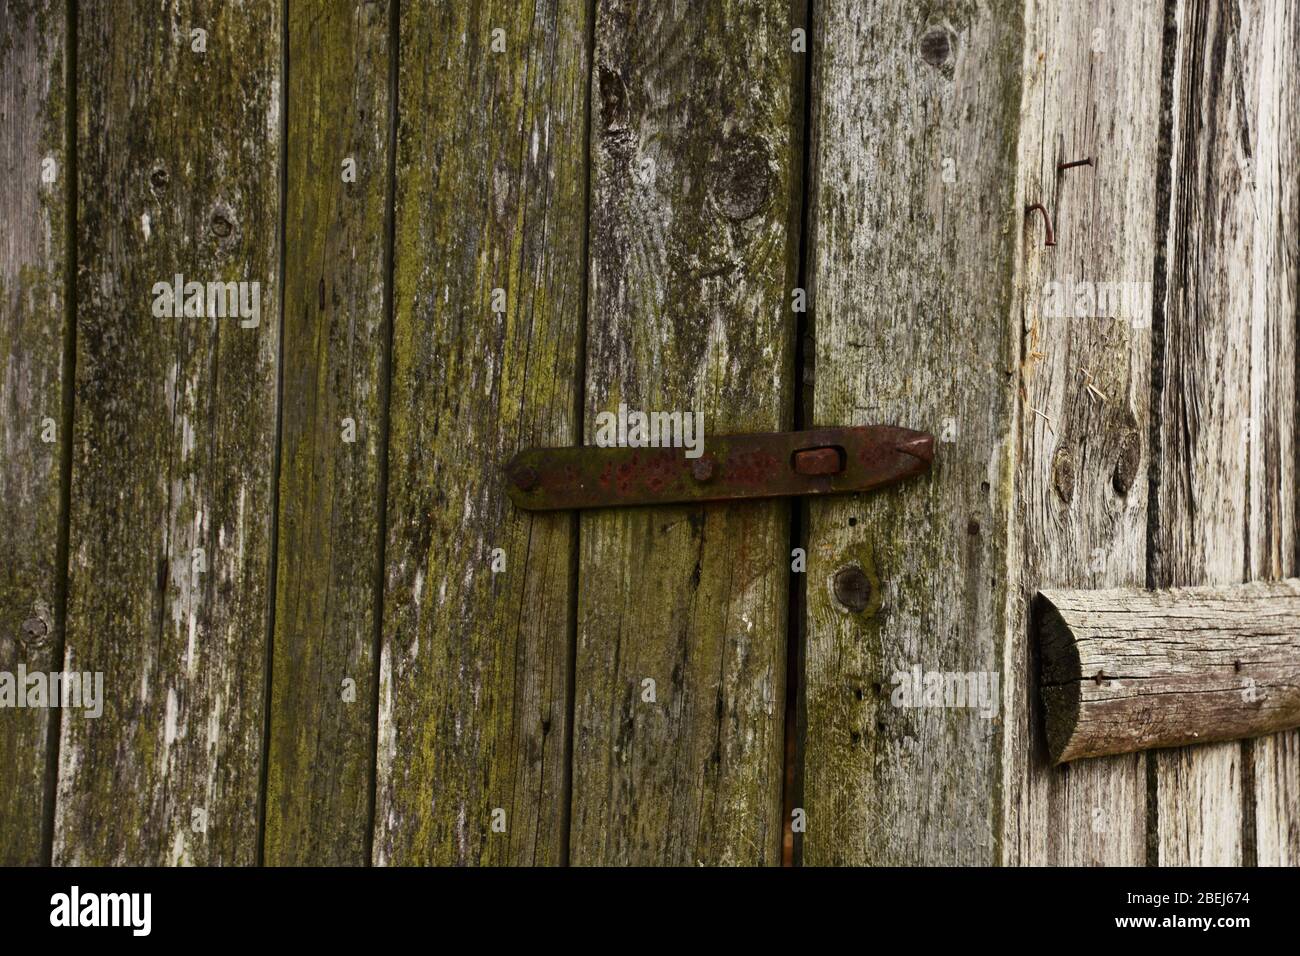 Detail of the old wooden door with a rusty metal lock Stock Photo